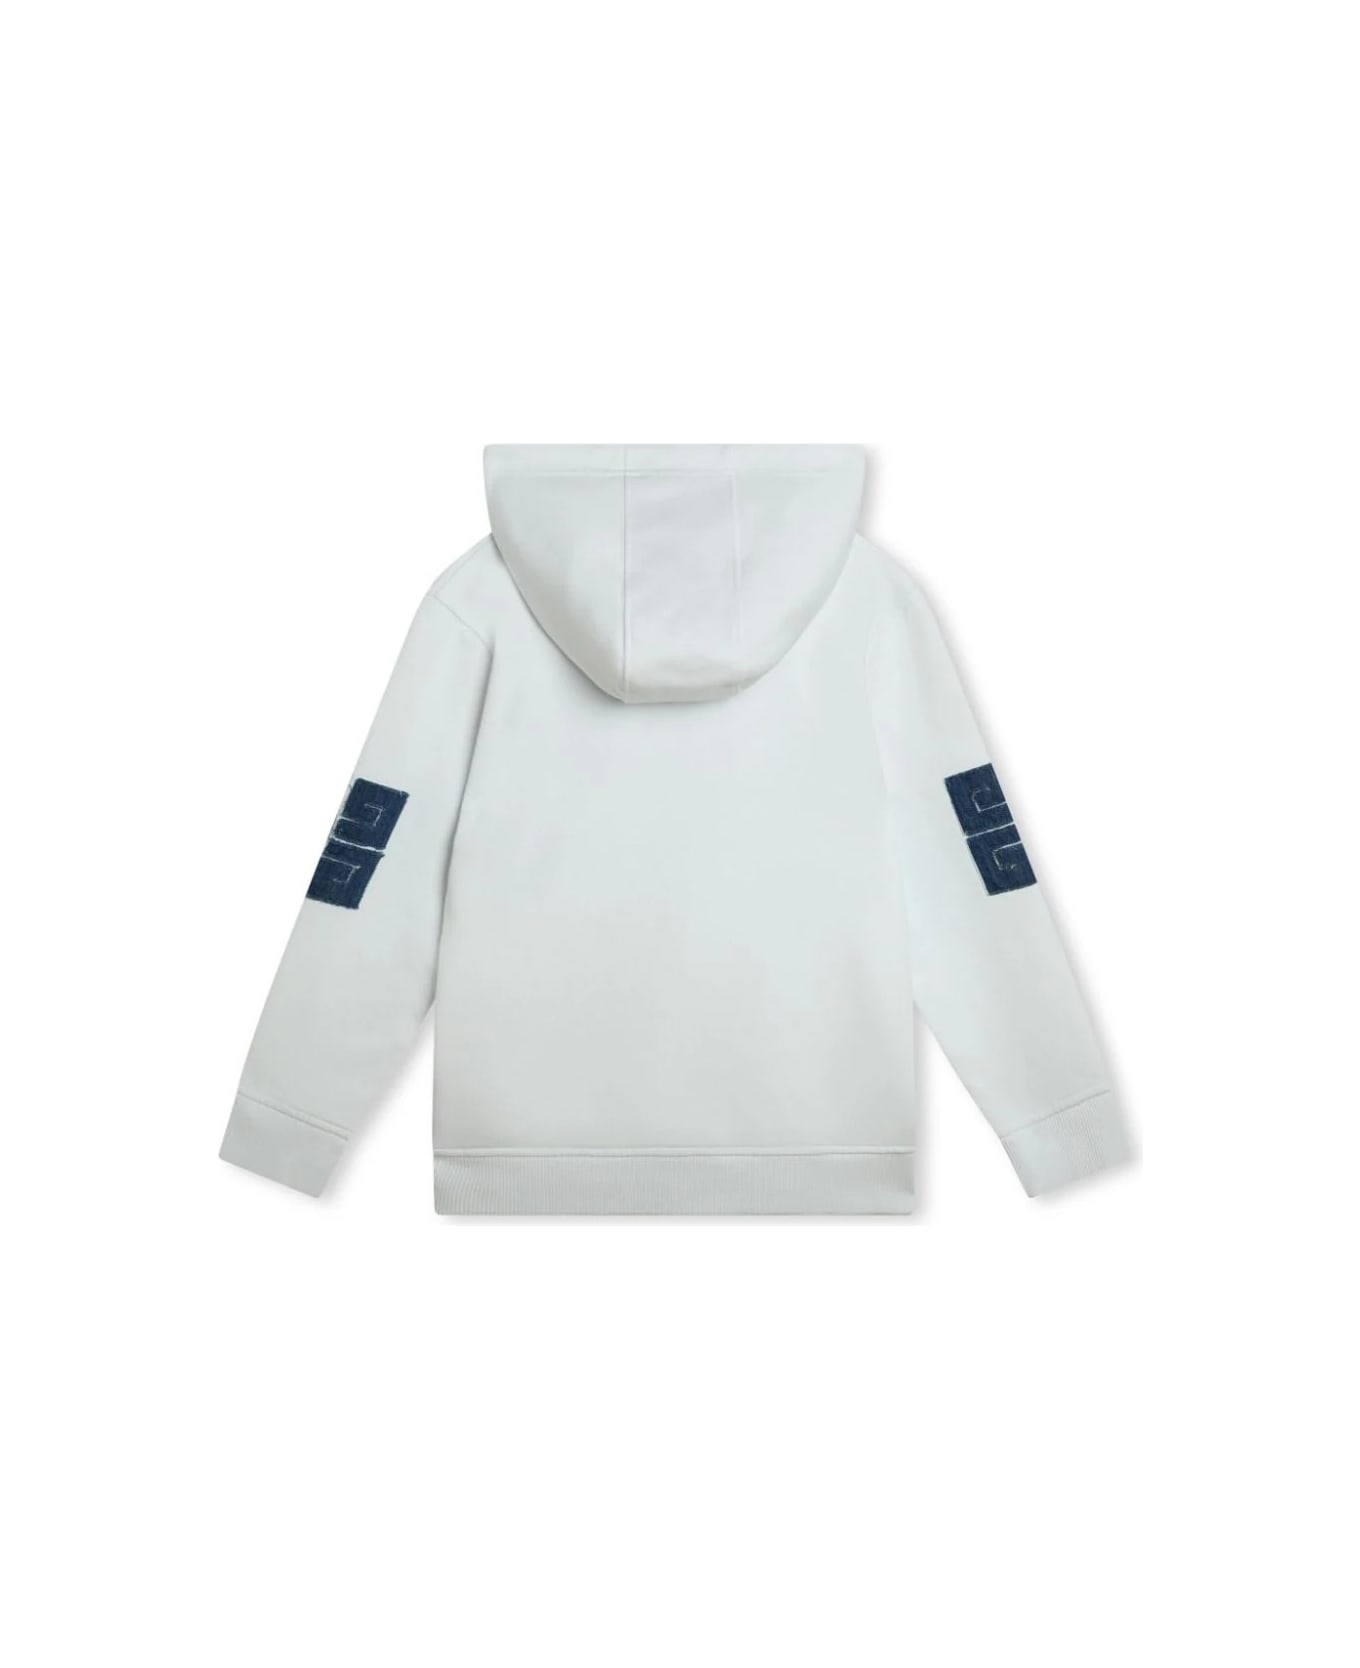 Givenchy White Hoodie With Denim Givenchy 4g Logo - White